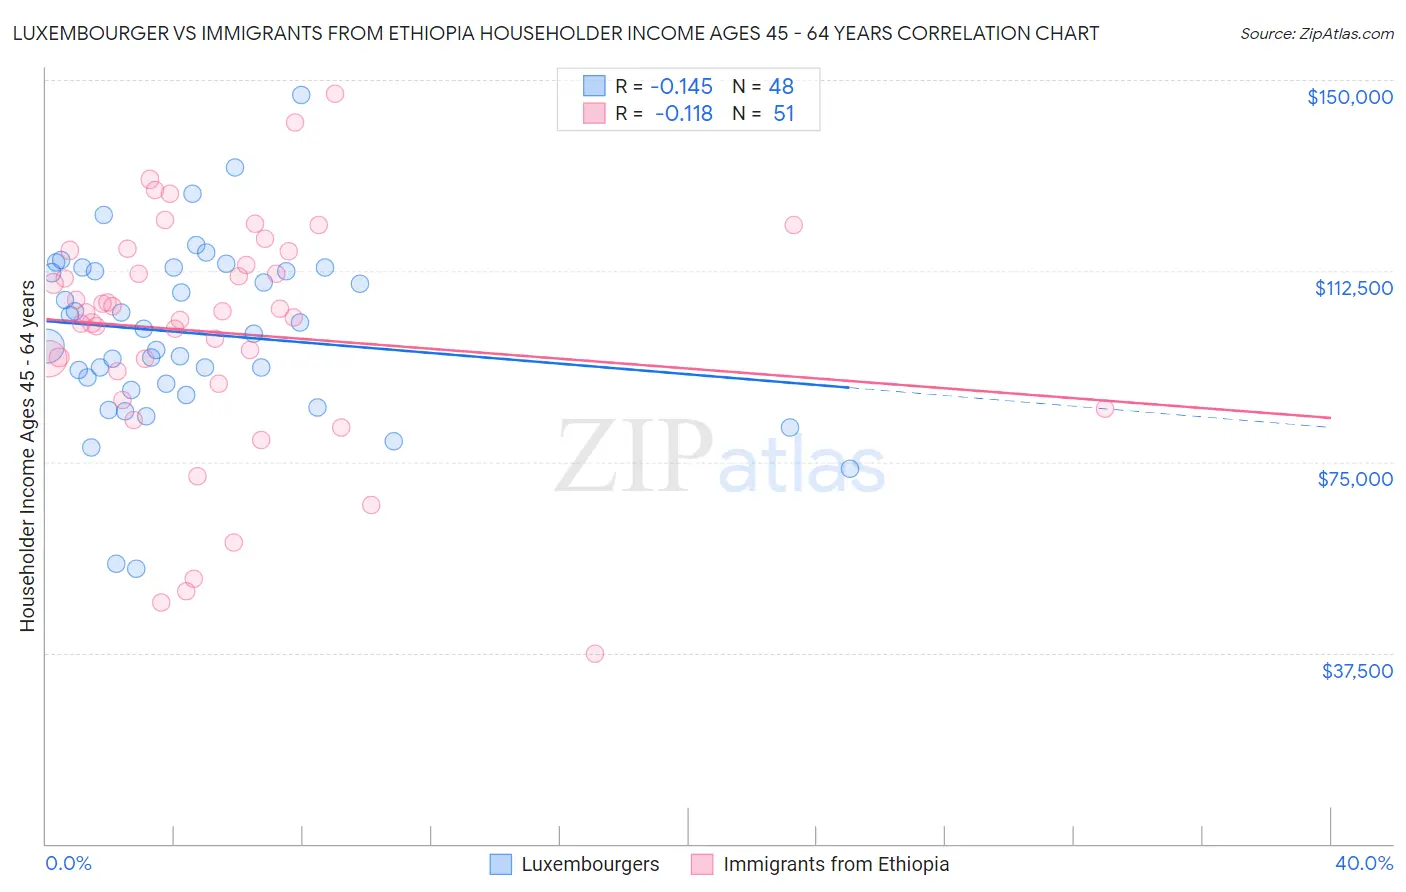 Luxembourger vs Immigrants from Ethiopia Householder Income Ages 45 - 64 years